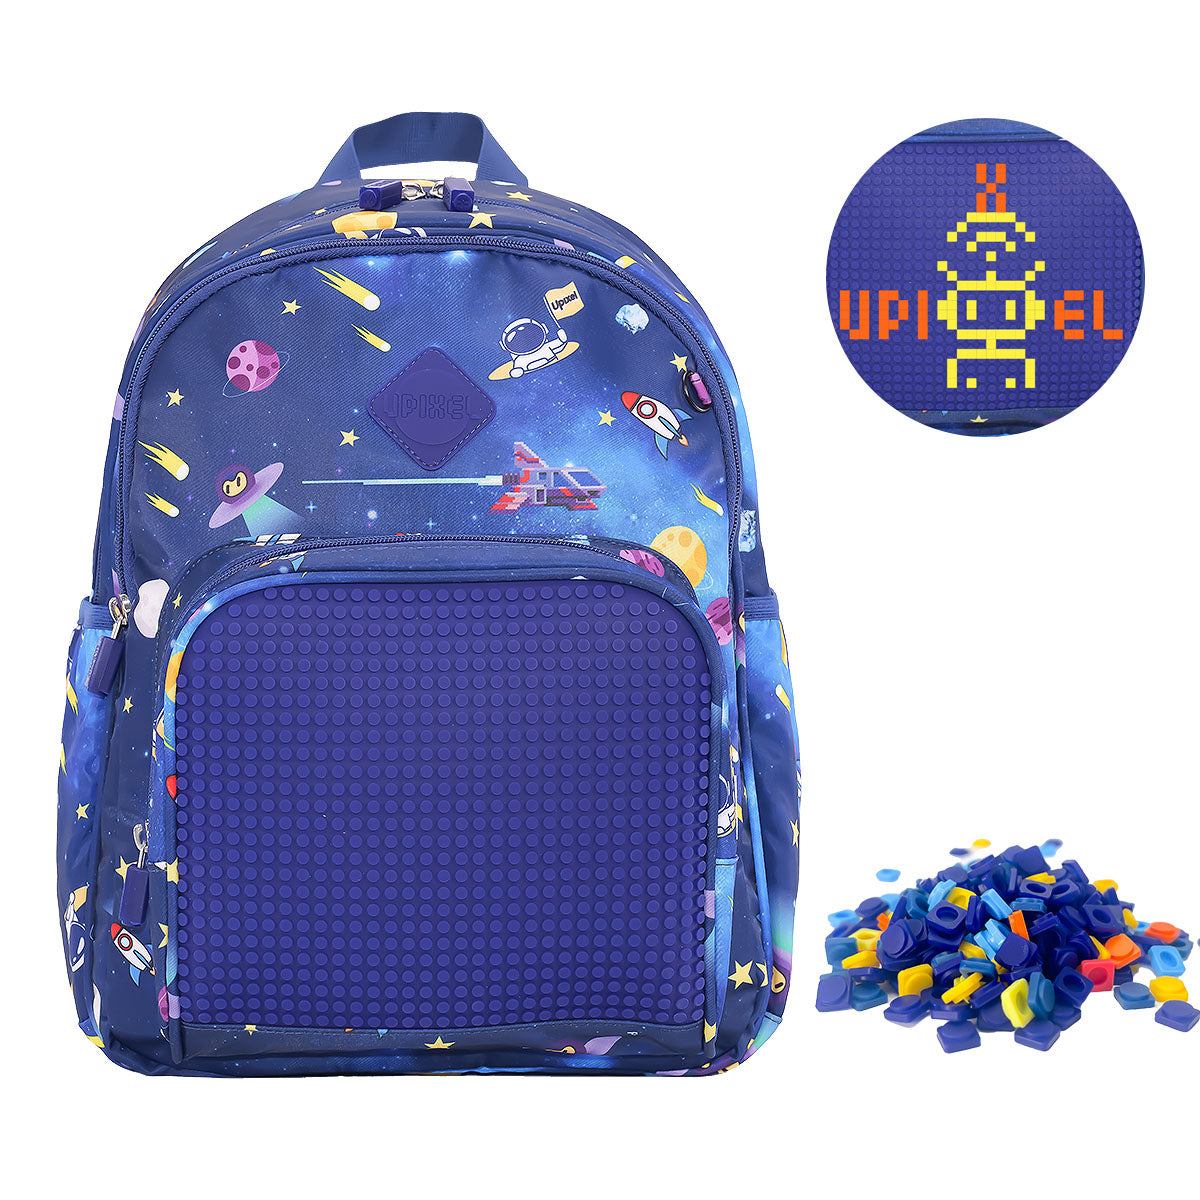 10 school bags to start the year with